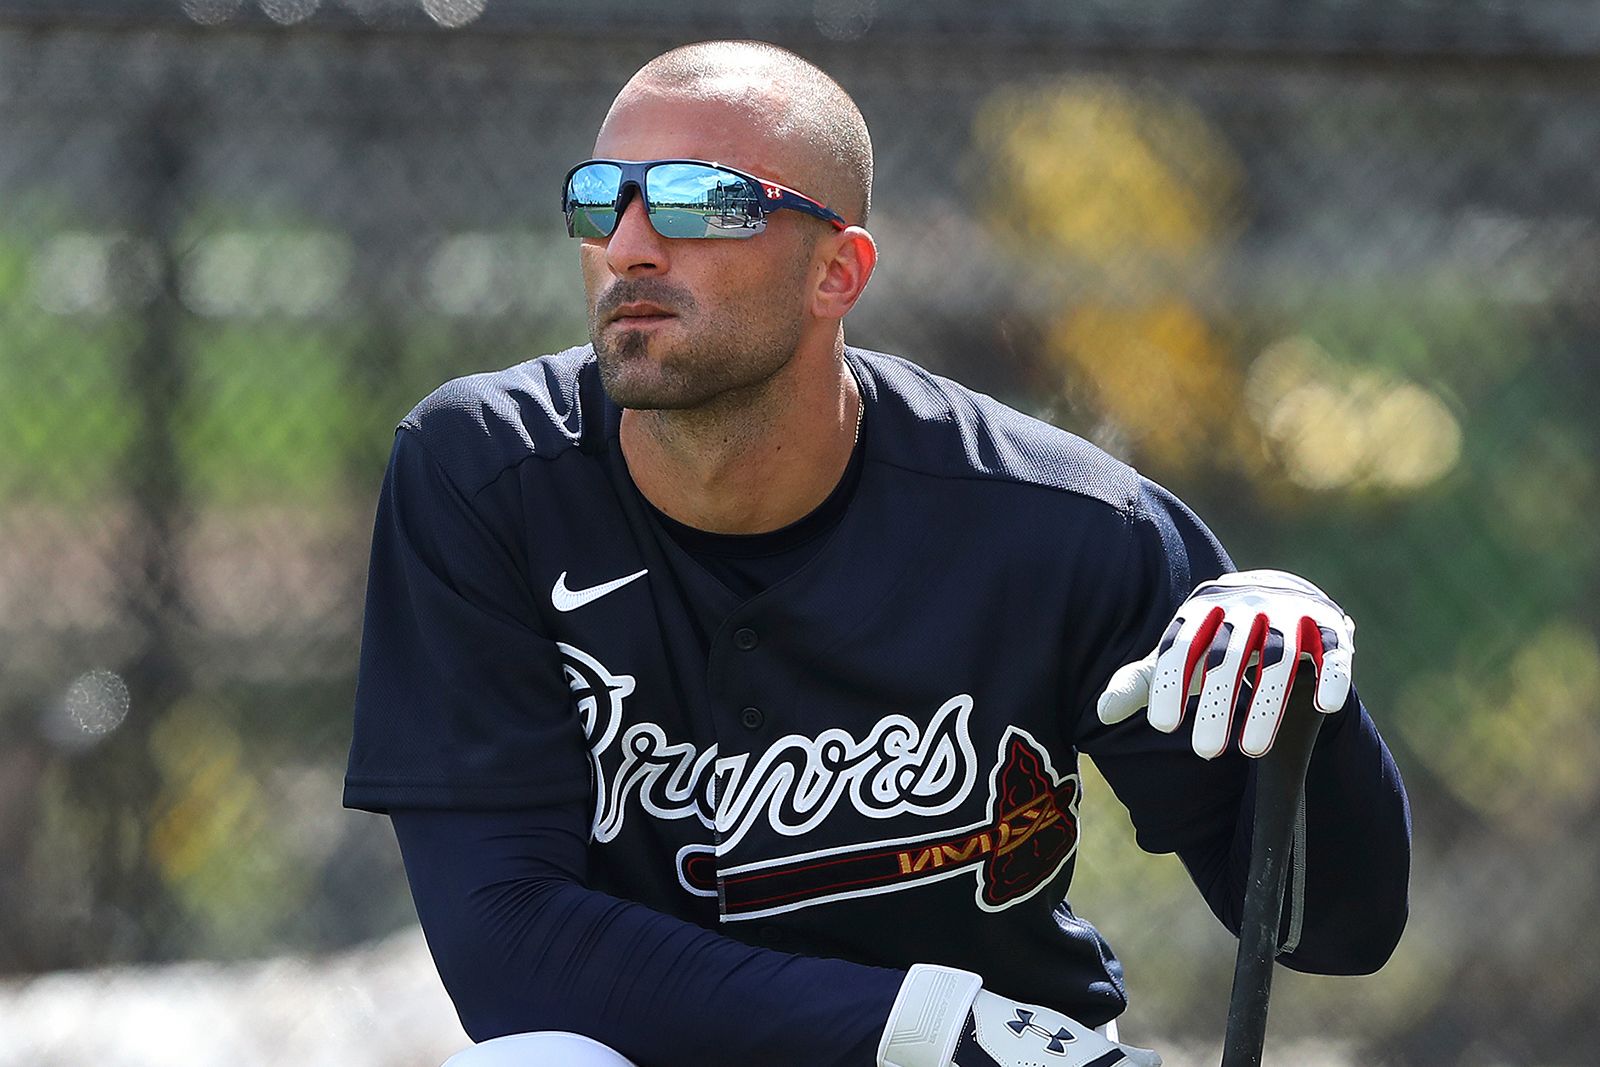 Nick Markakis isn't enough for the Braves' outfield - Beyond the